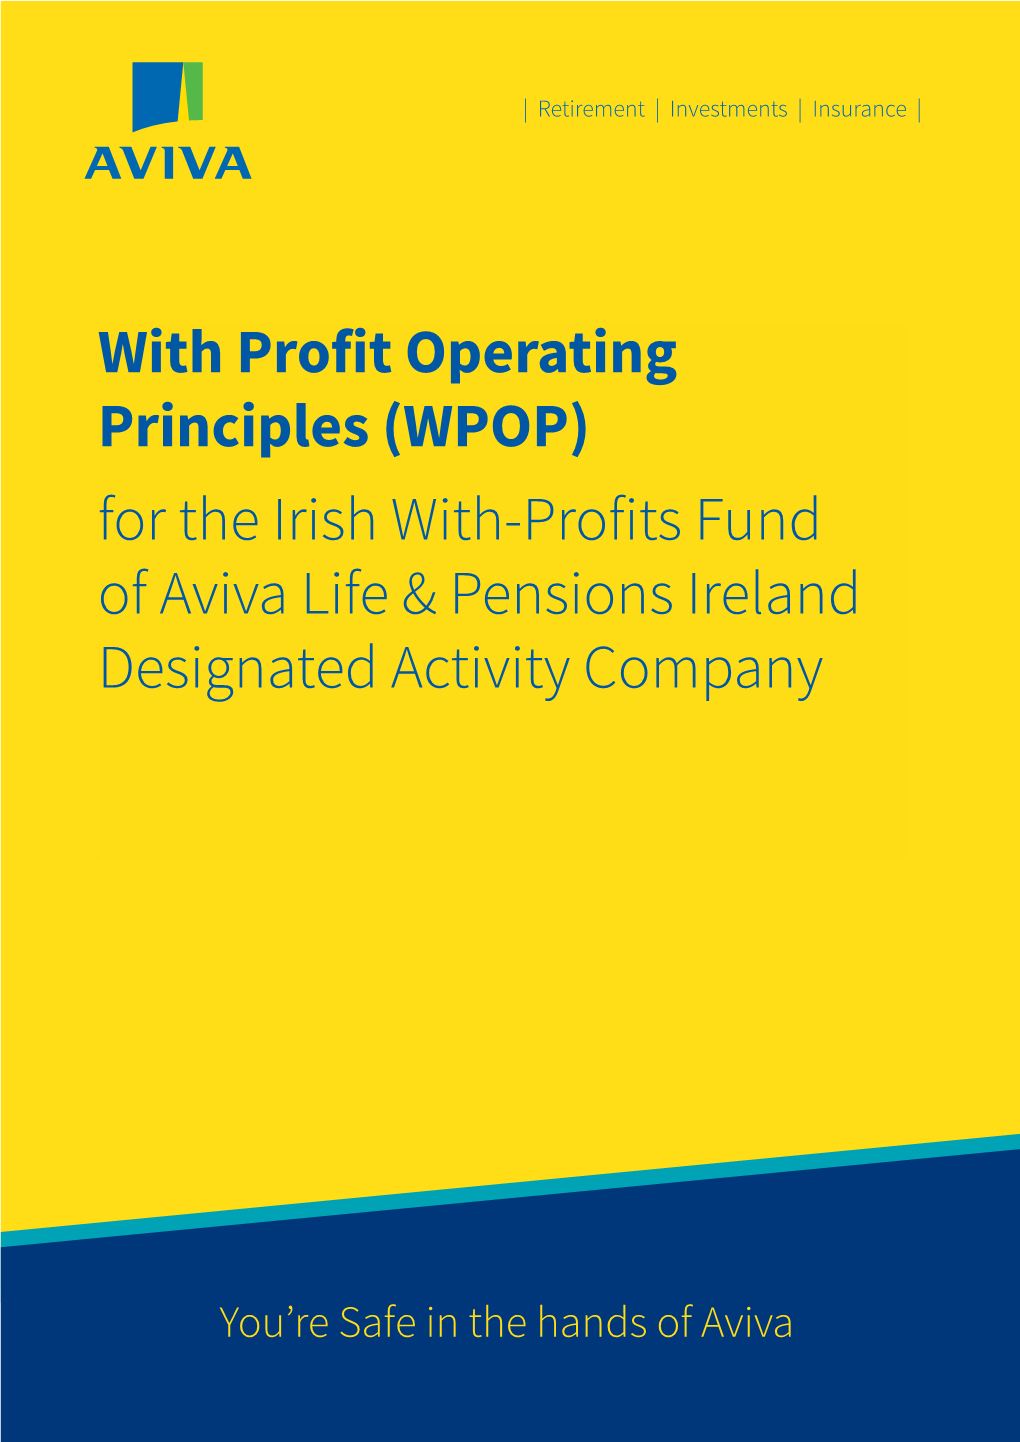 With Profit Operating Principles (WPOP) for the Irish With-Profits Fund of Aviva Life & Pensions Ireland Designated Activity Company